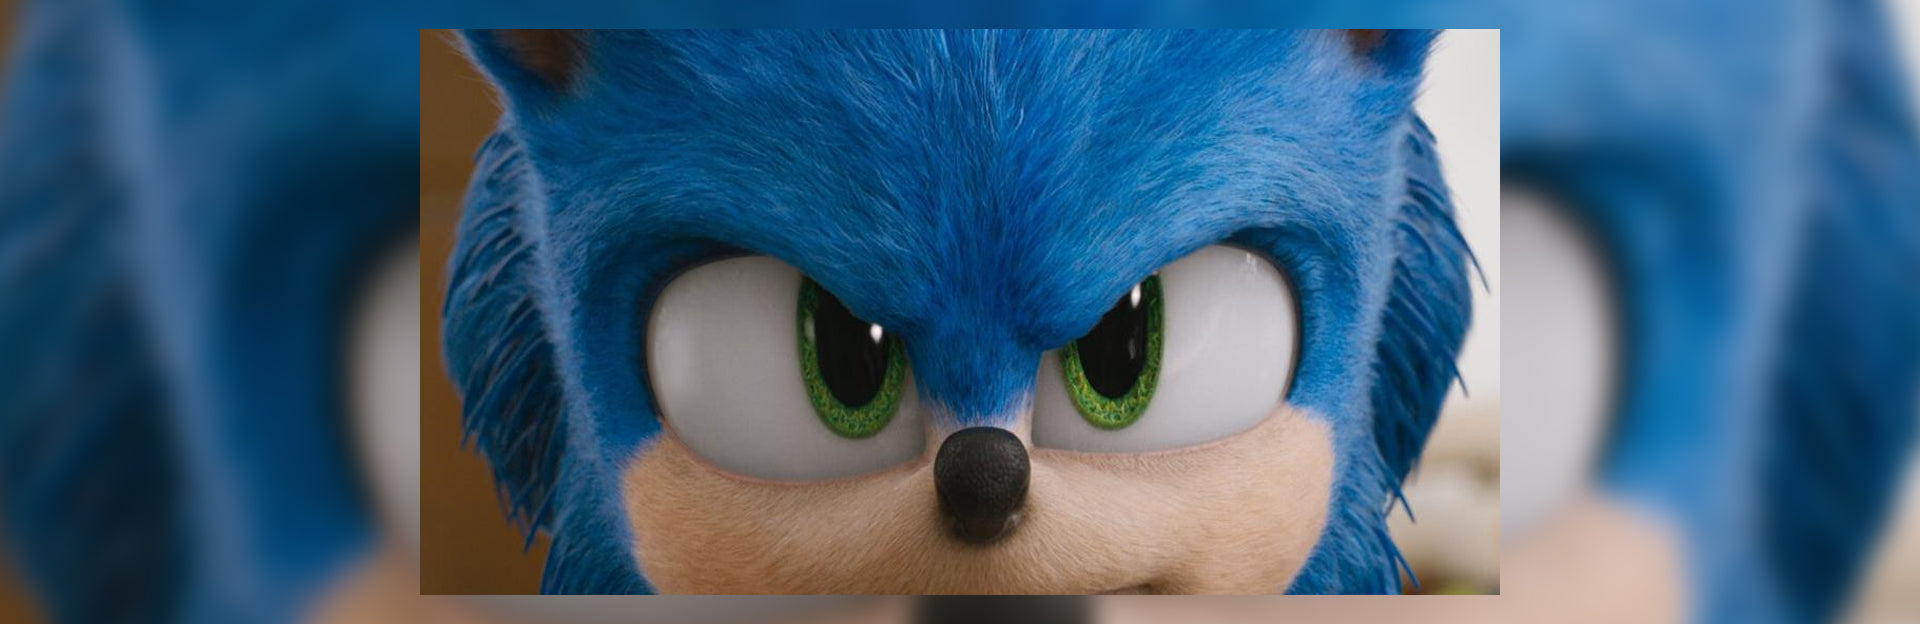 Sonic The Hedgehog - No chance to win against this one.